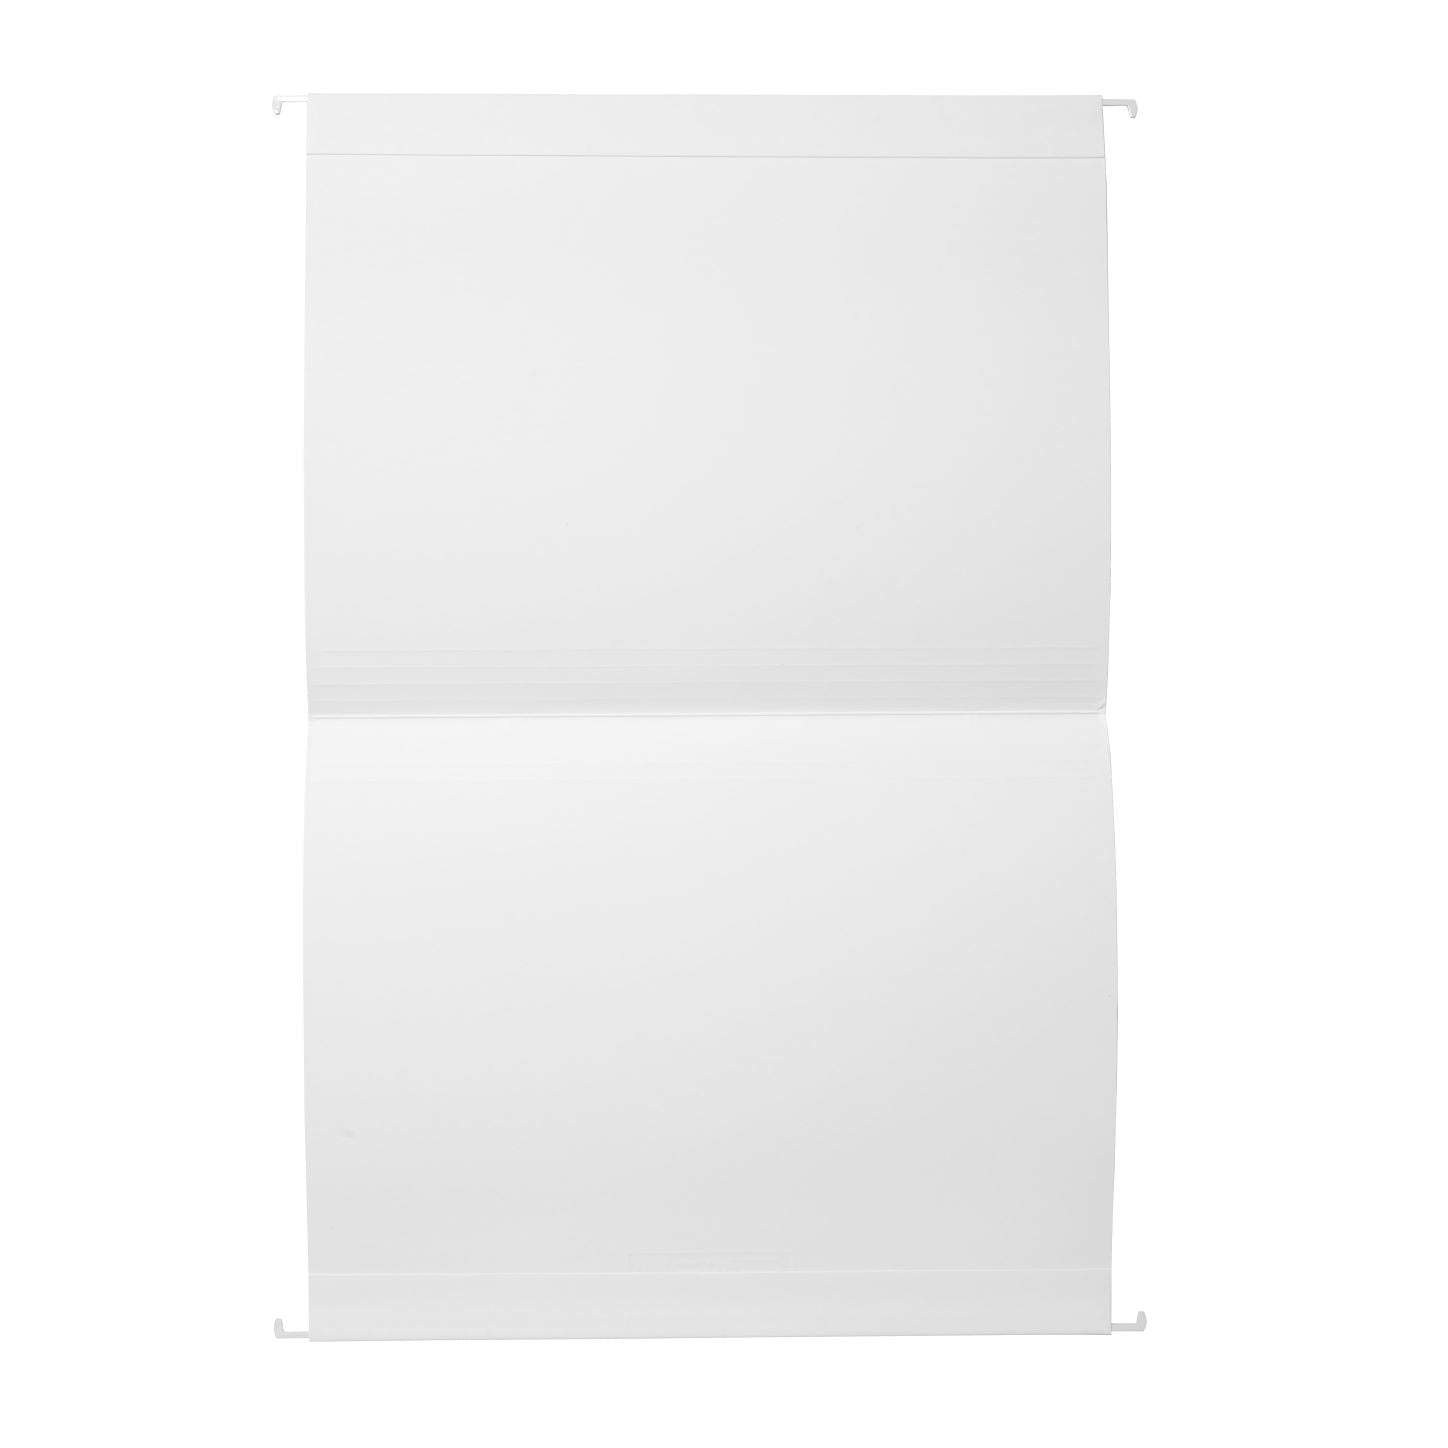 Clear Acrylic Slim Hanging File Box, Letter Sized, 4.5 x 12.25 x 10  (31733)